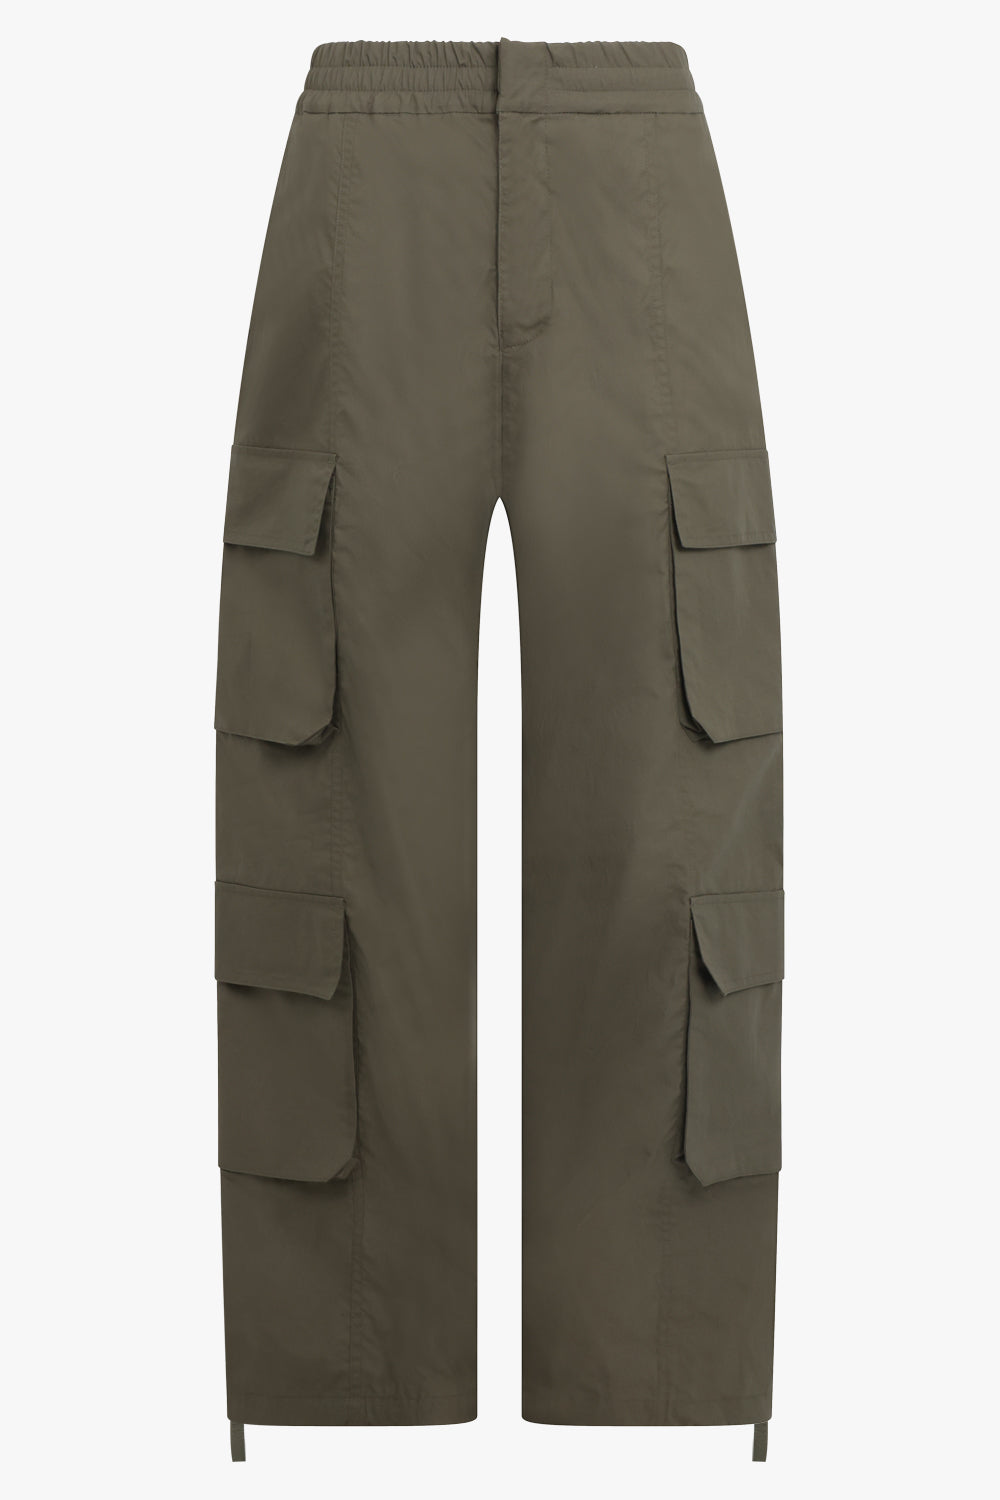 AFTER PRAY Unclassified RELAXED UTILITY QUATRO CARGO PANTS | KHAKI